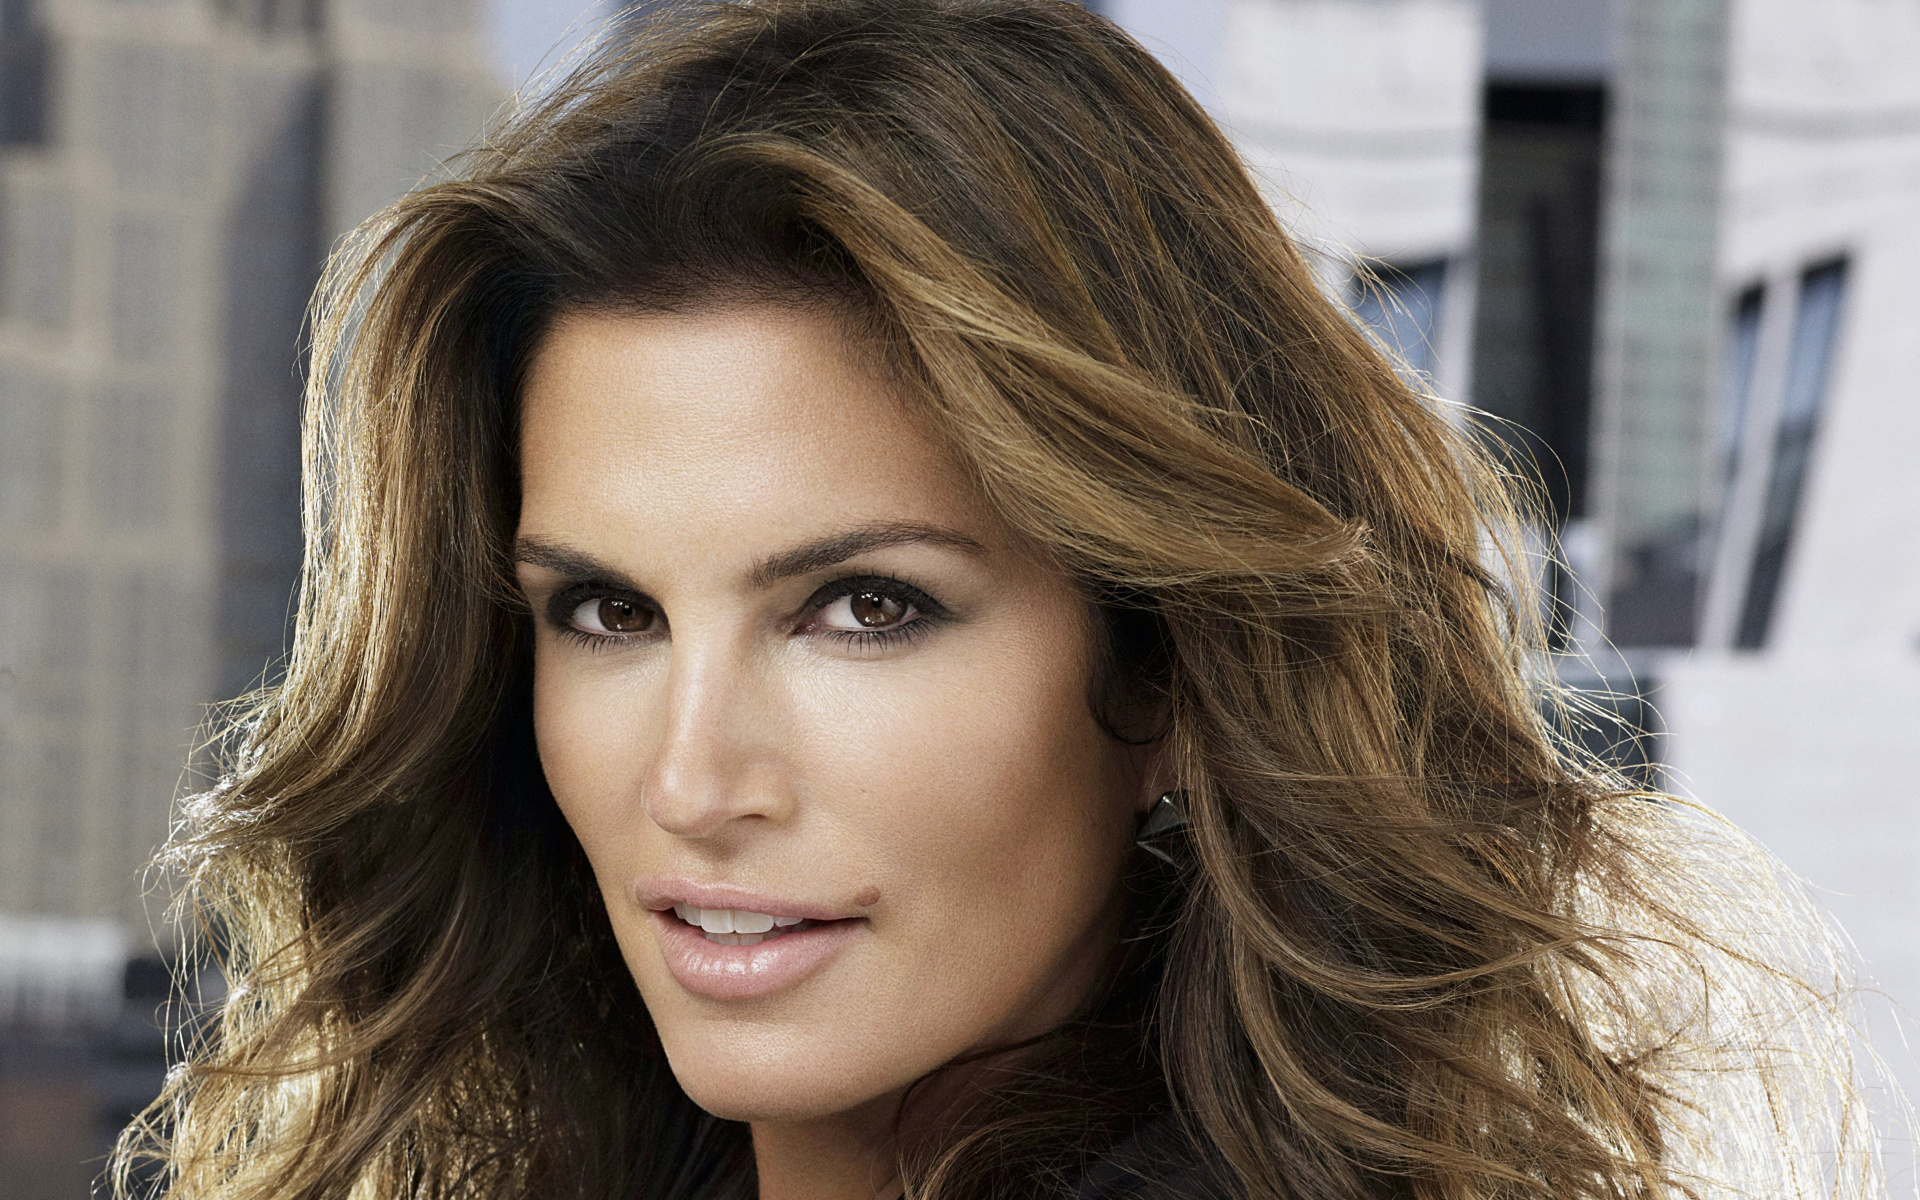 Cindy Crawford, Gorgeous wallpaper, High-quality image, Flawless beauty, 1920x1200 HD Desktop